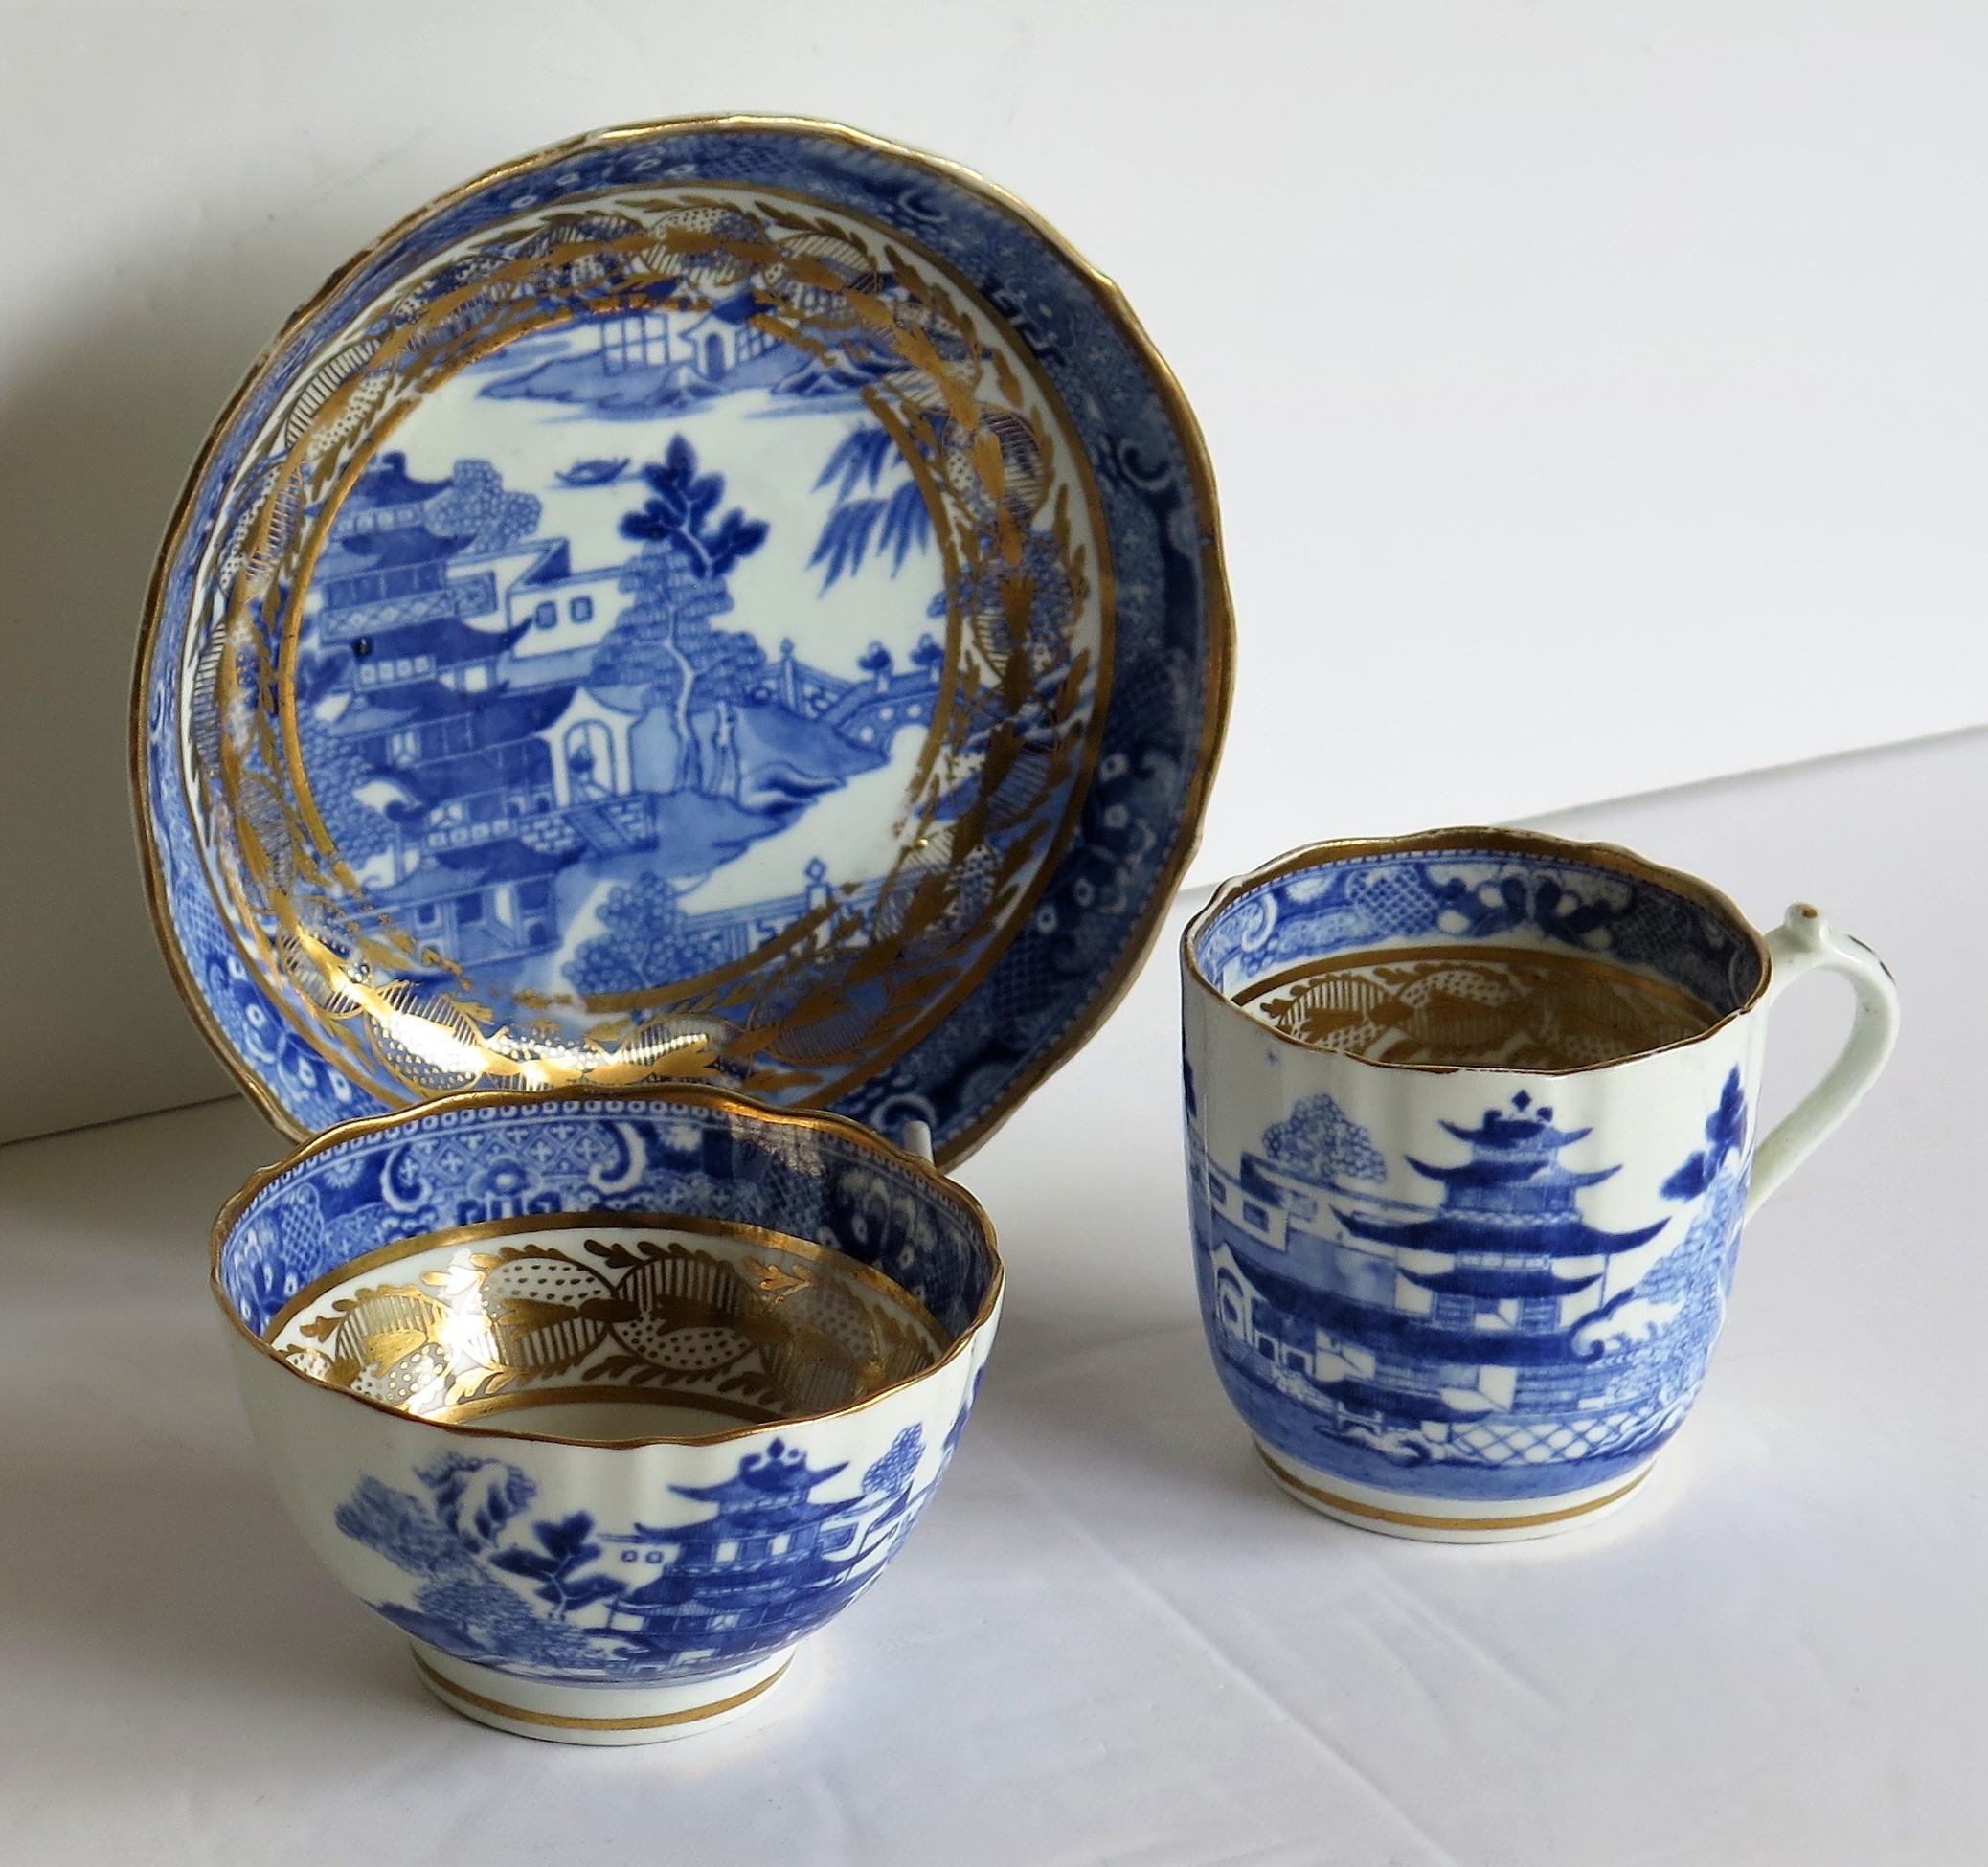 Chinoiserie Miles Mason Porcelain Trio Blue and White Broseley Gilded Willow Ptn 50, Ca 1808